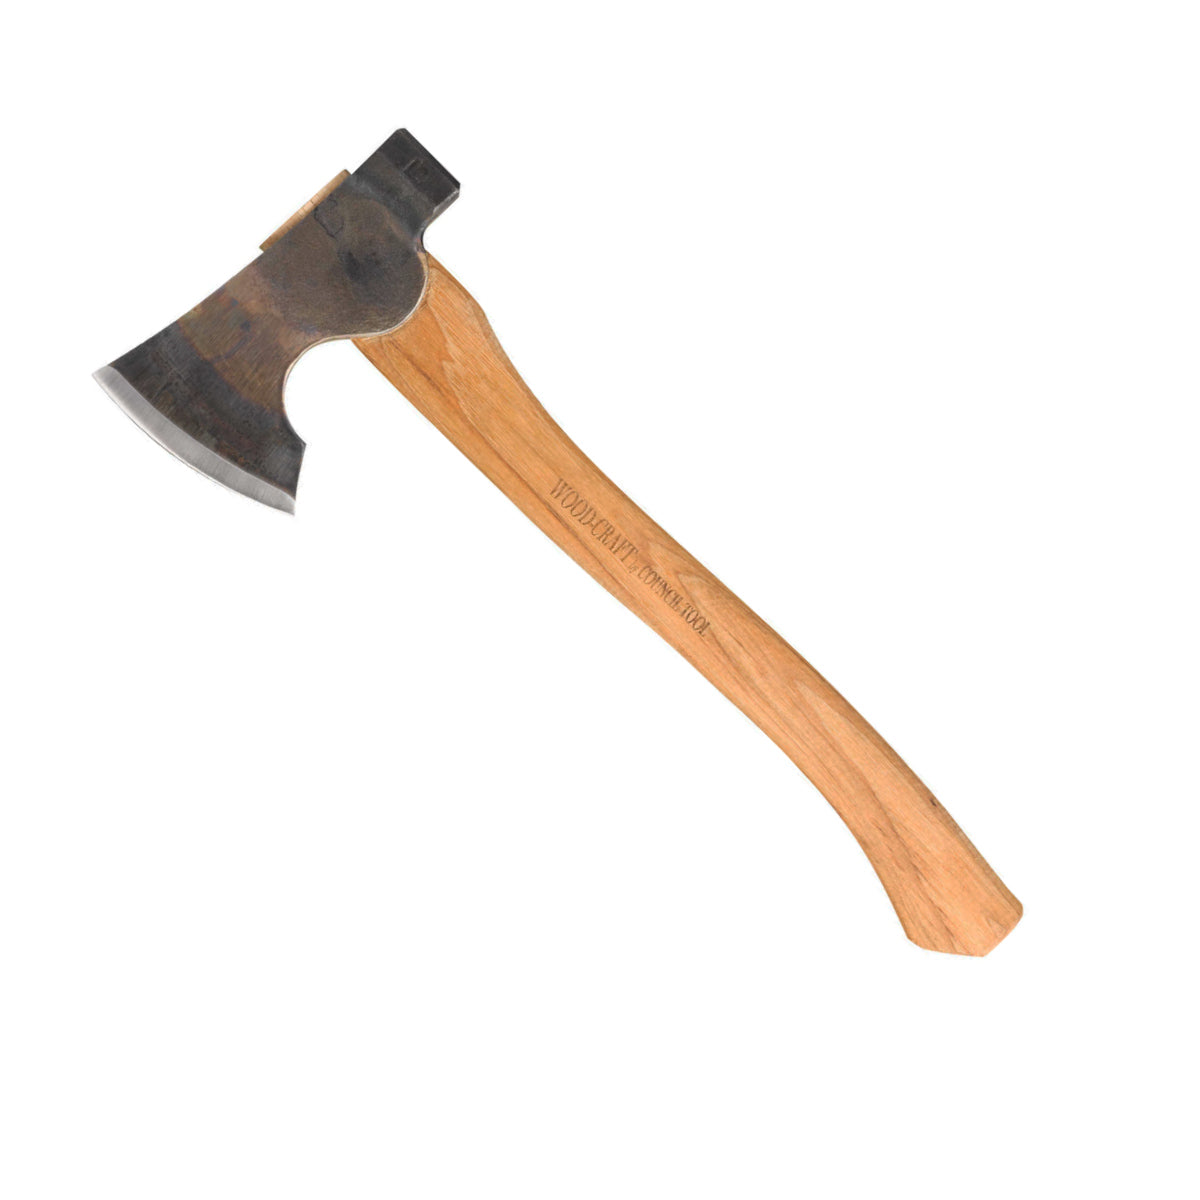 Council Tool 1.7 Wood-craft Camp Carver Axe, 16 Curved Handle Axe - Brand